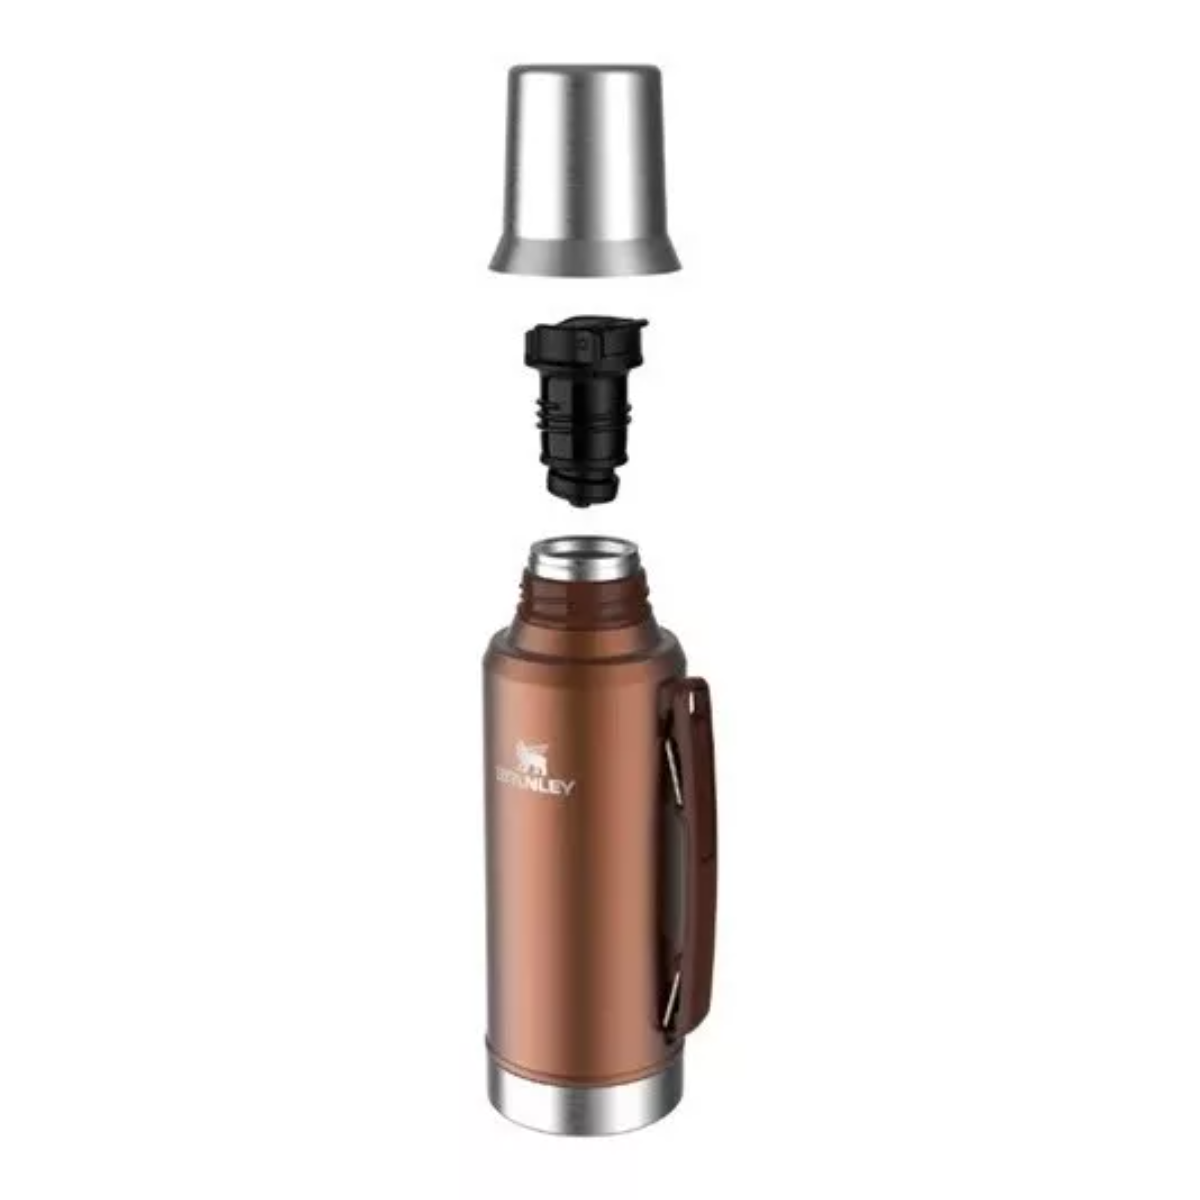 Termo Stanley Mate System Classic 800 Ml + Mate Stanley Pico